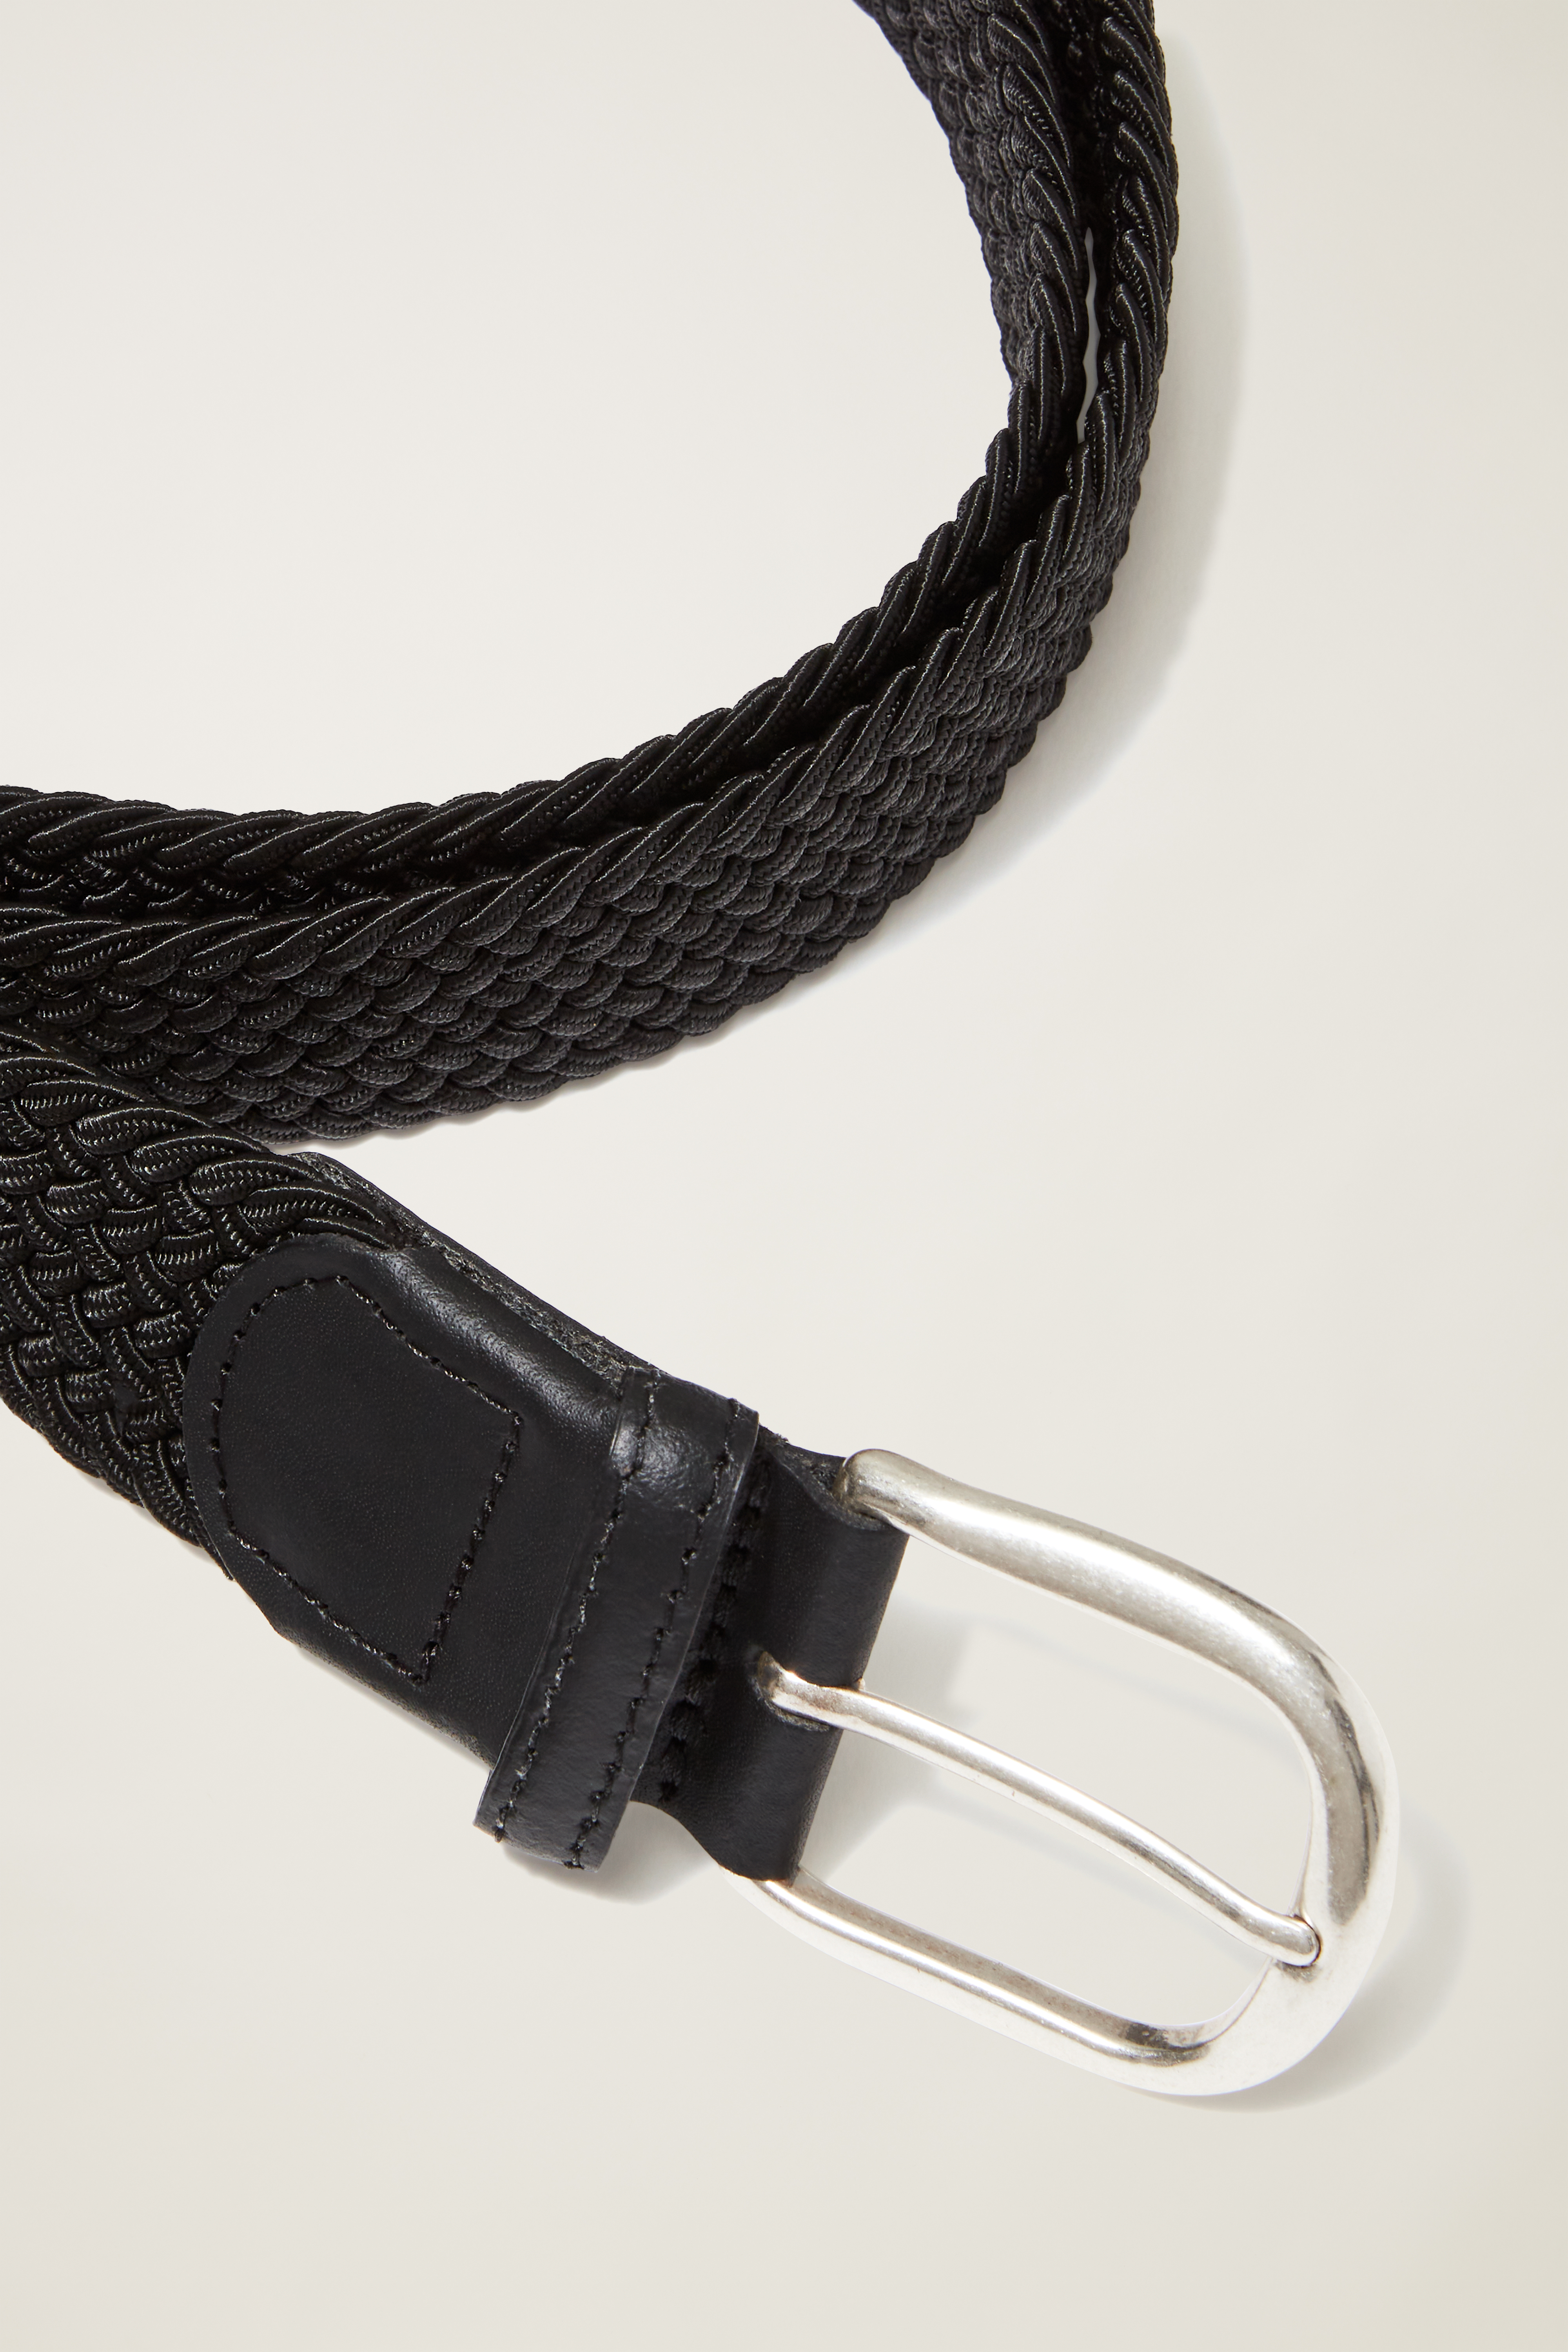 Cinch Your Style With Bonobos' Clubhouse Stretch Braided Belt